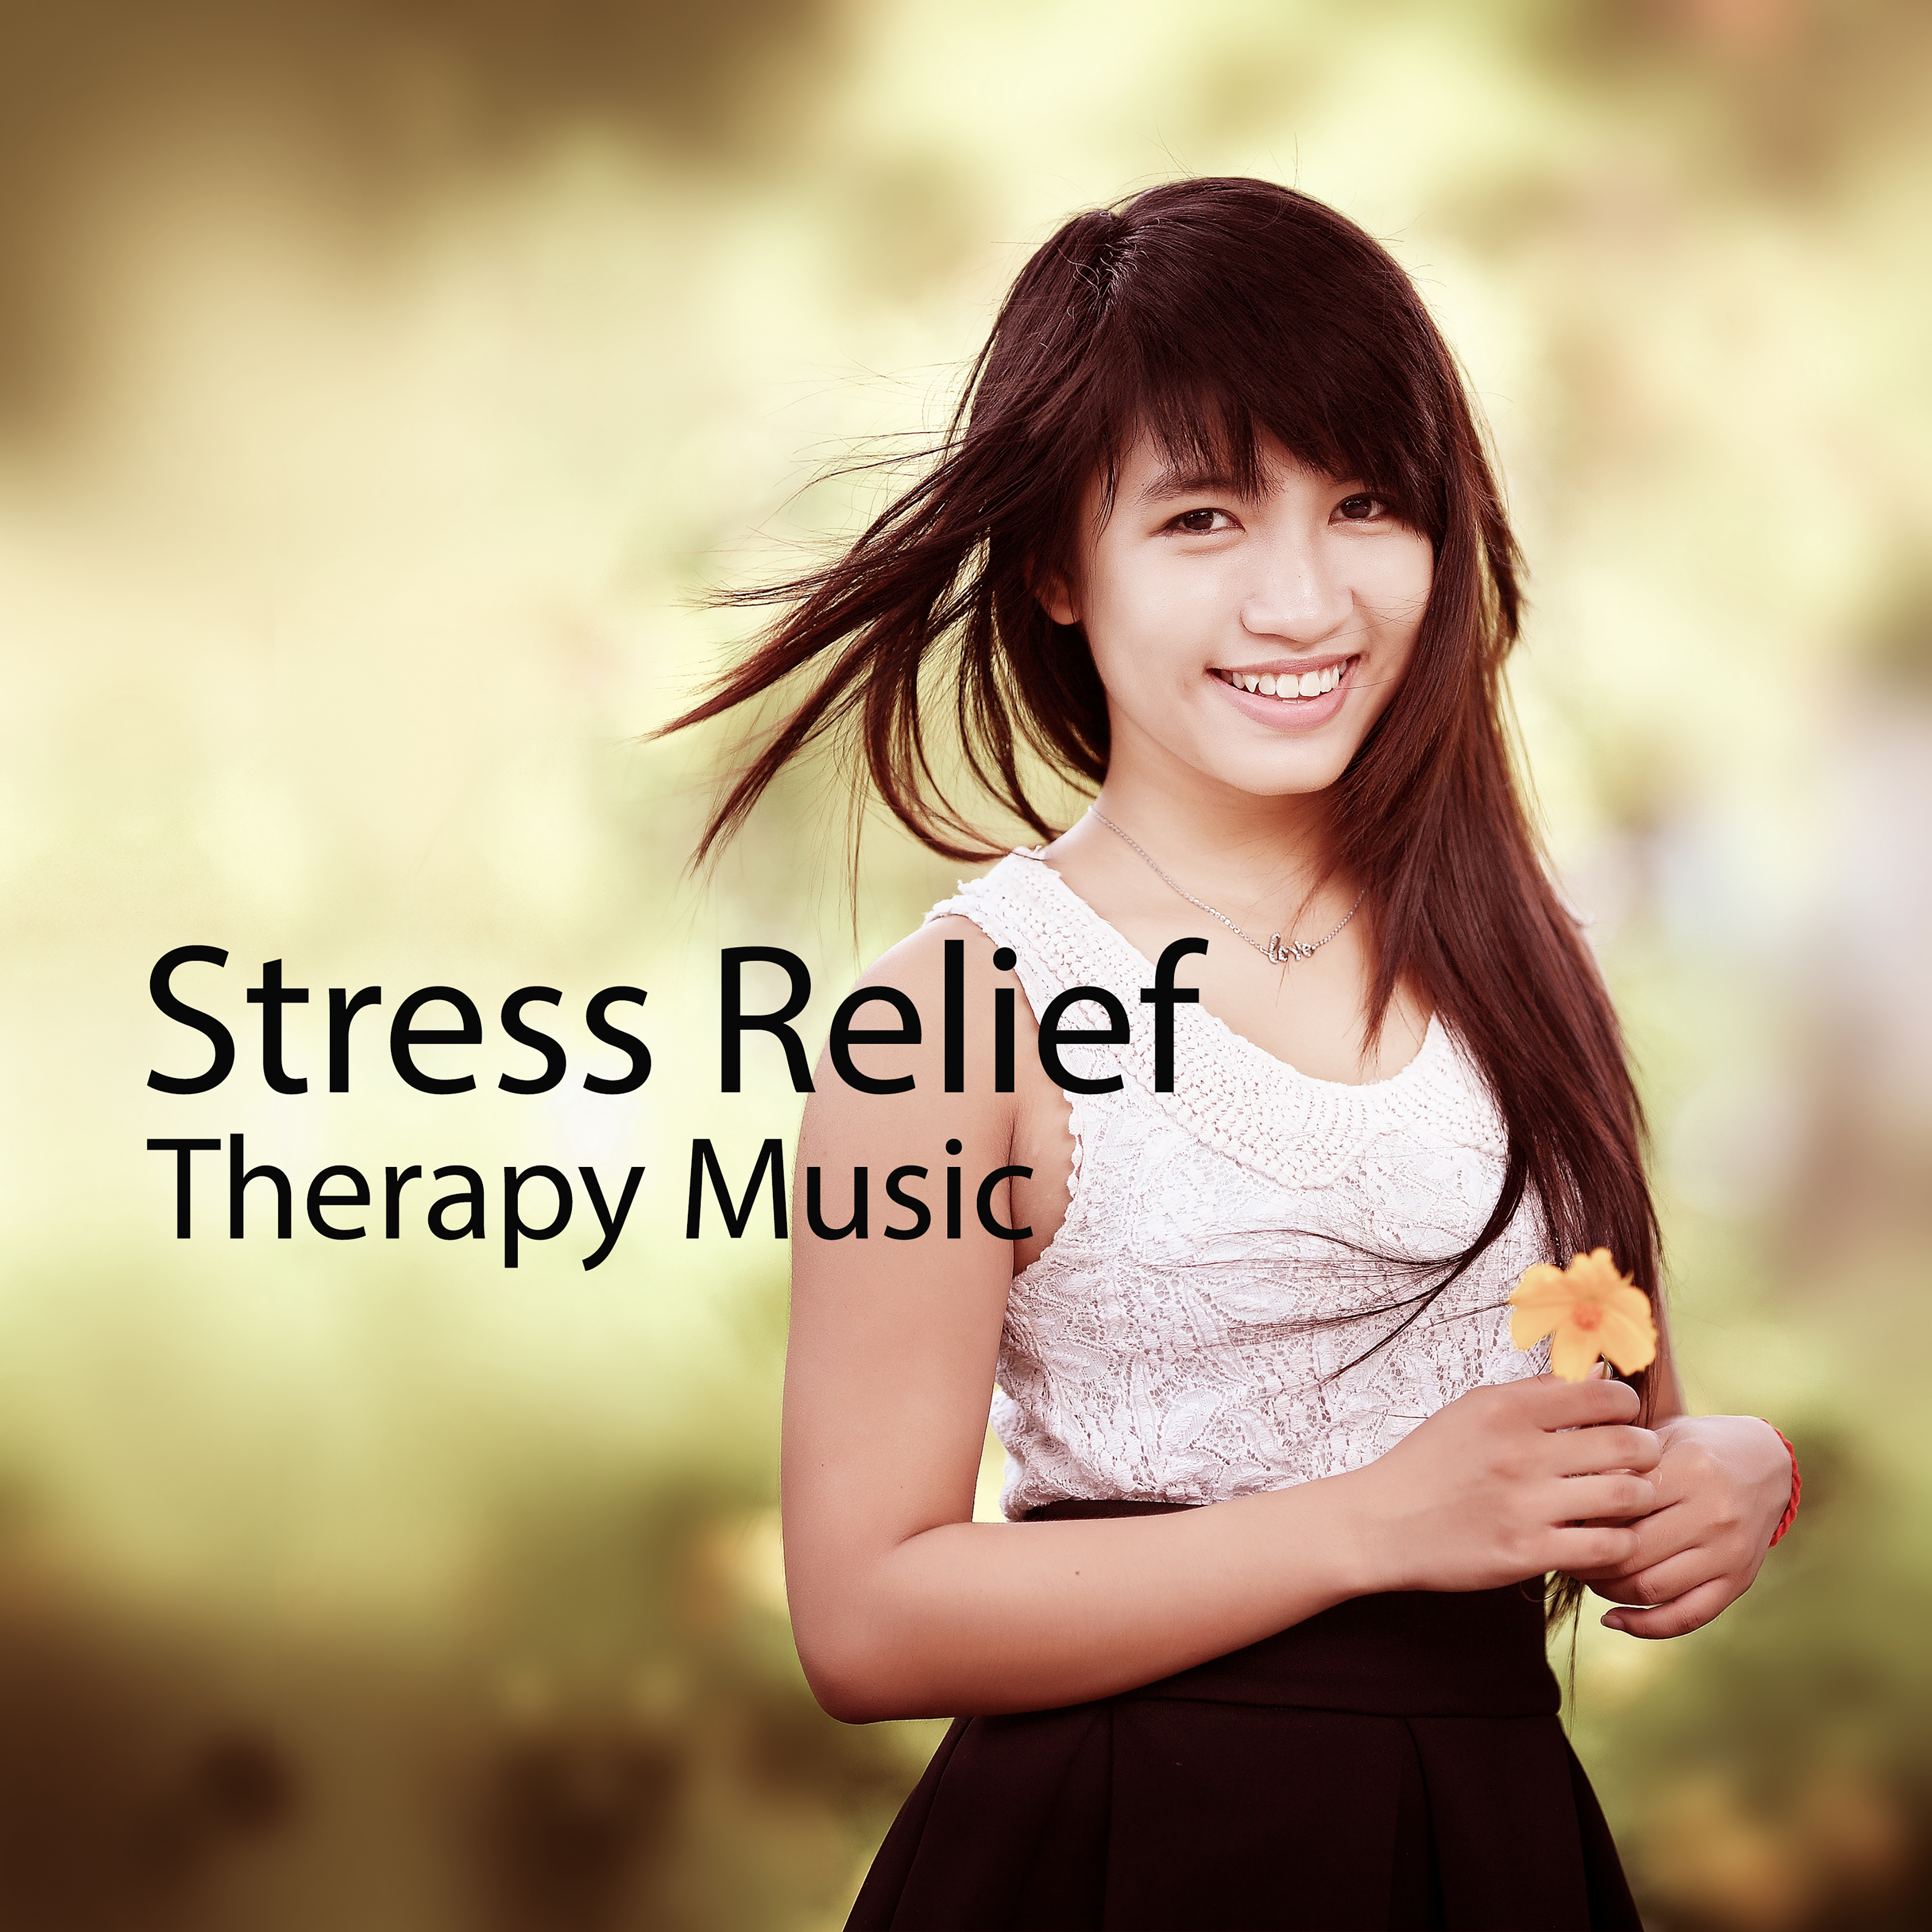 Stress Relief Therapy Music  Calming New Age Music, Relax, Rest, Healing Melodies